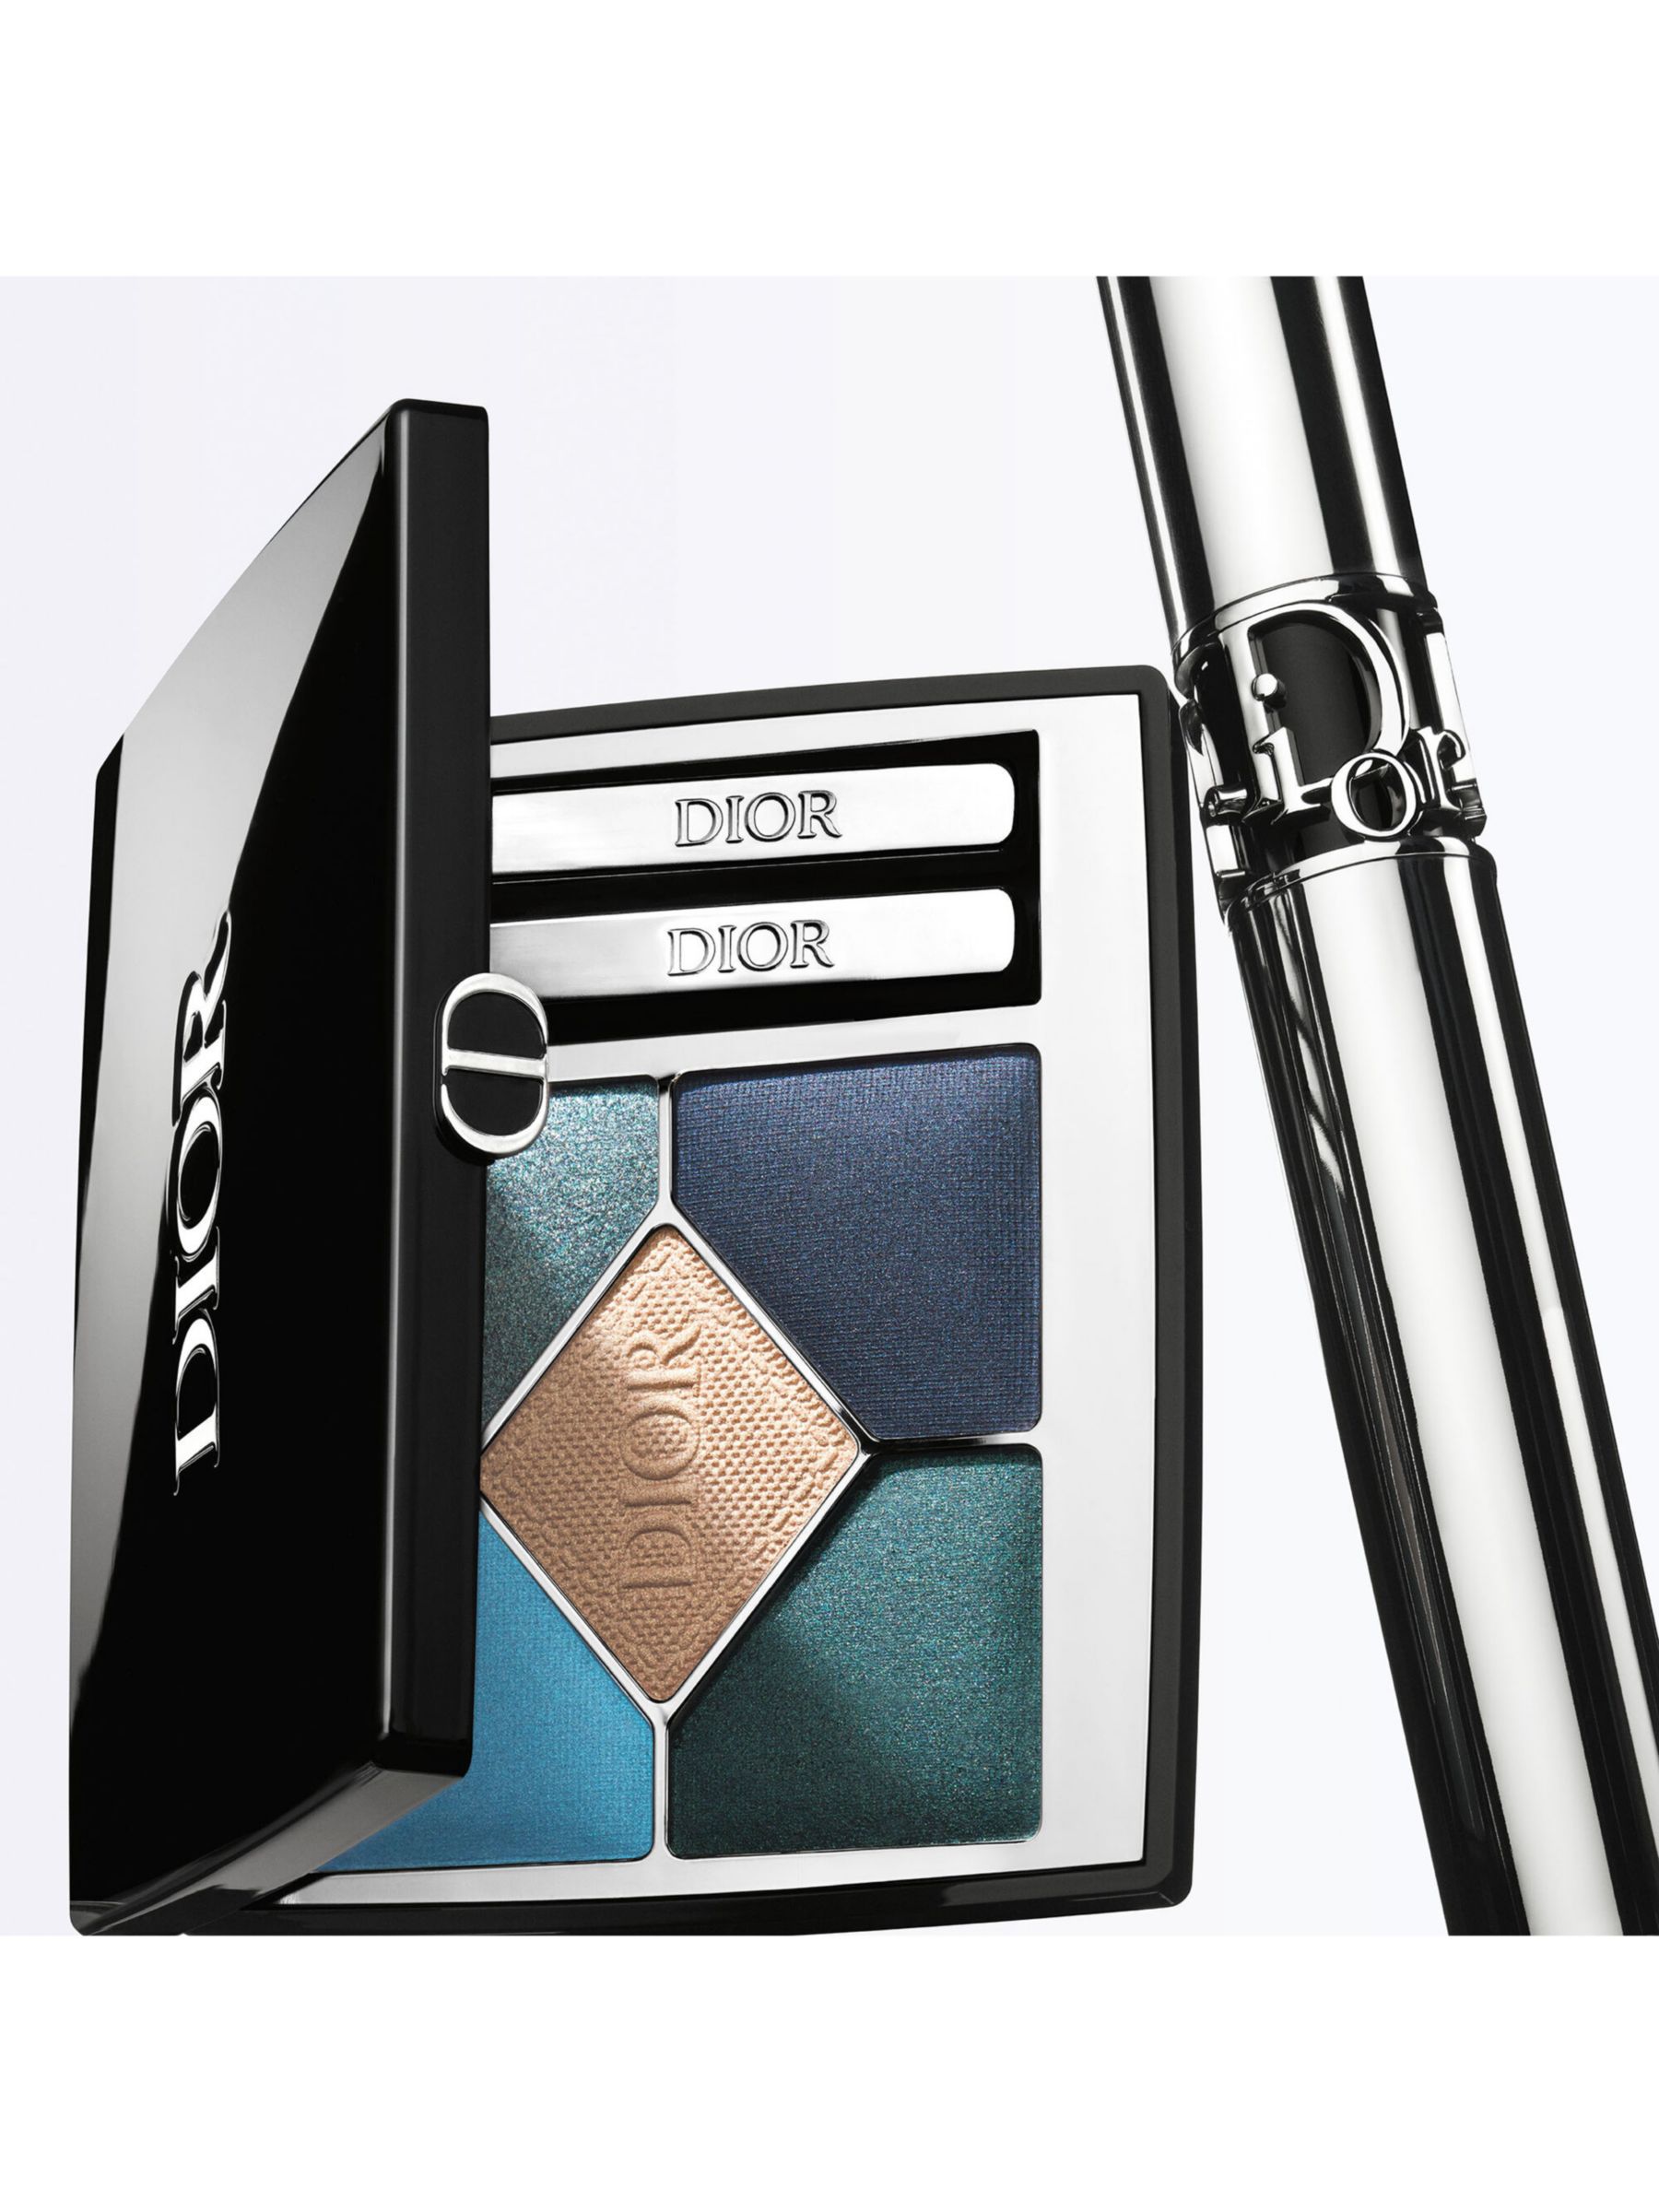 DIOR Diorshow 5 Couleurs Couture Eyeshadow Palette, 649 Nude 